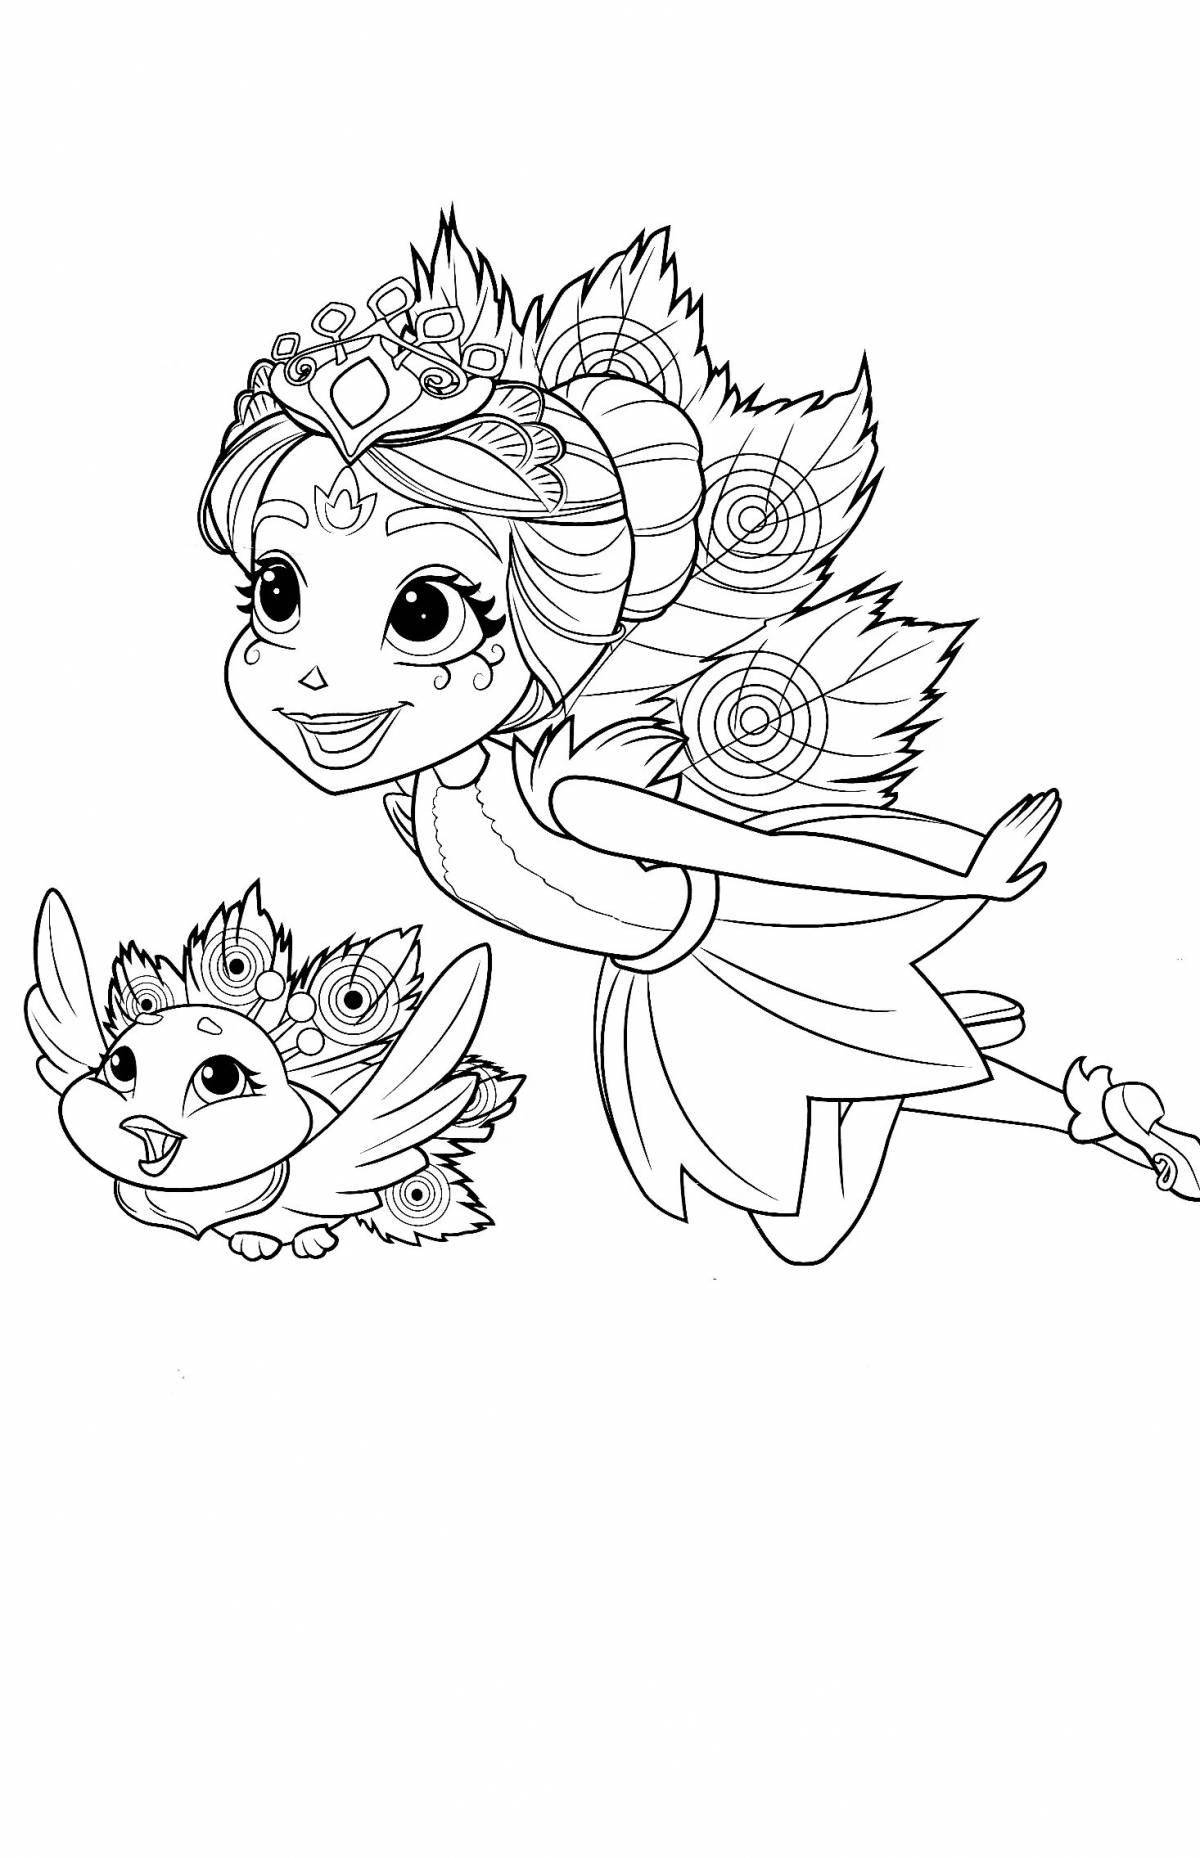 Colorful incantimuls coloring page